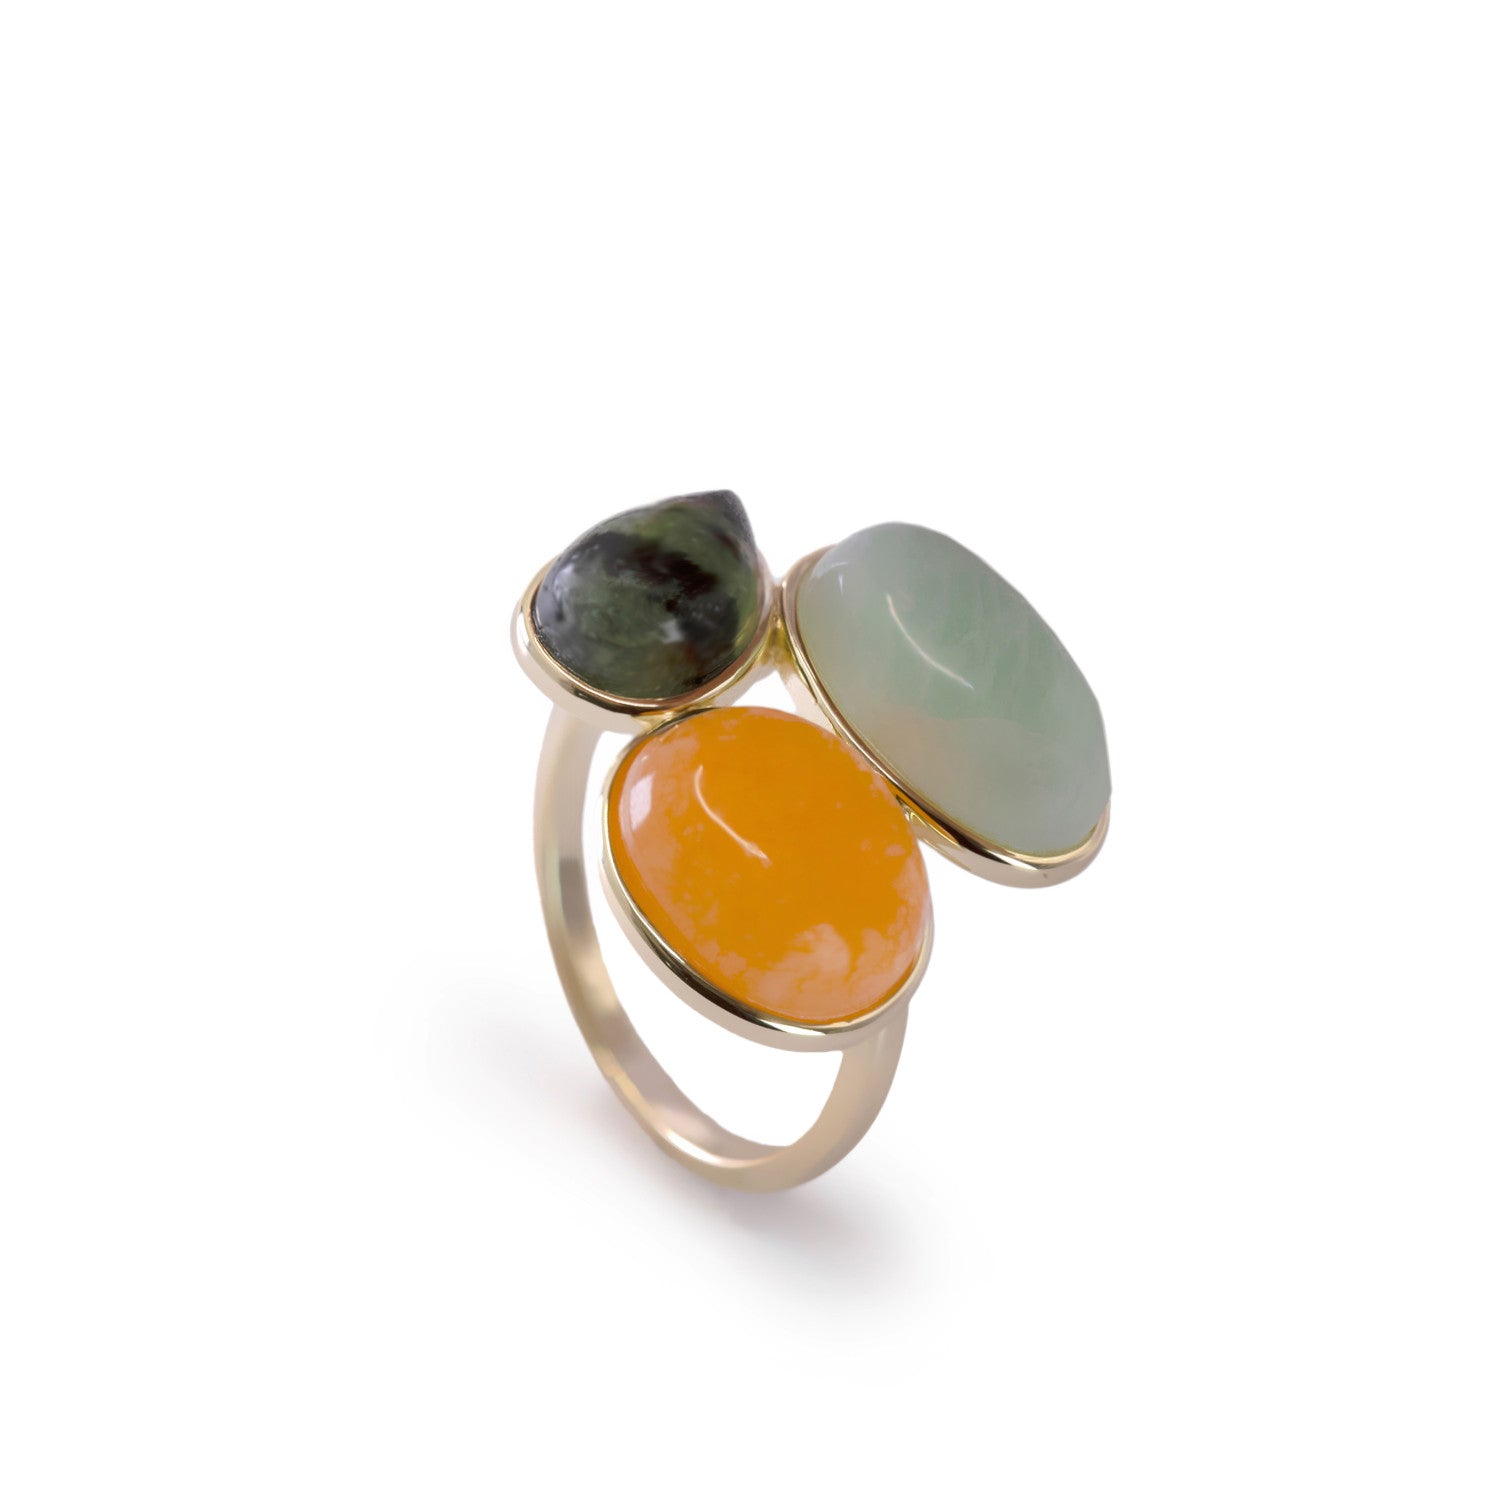 Rings with silver stones in nature tone